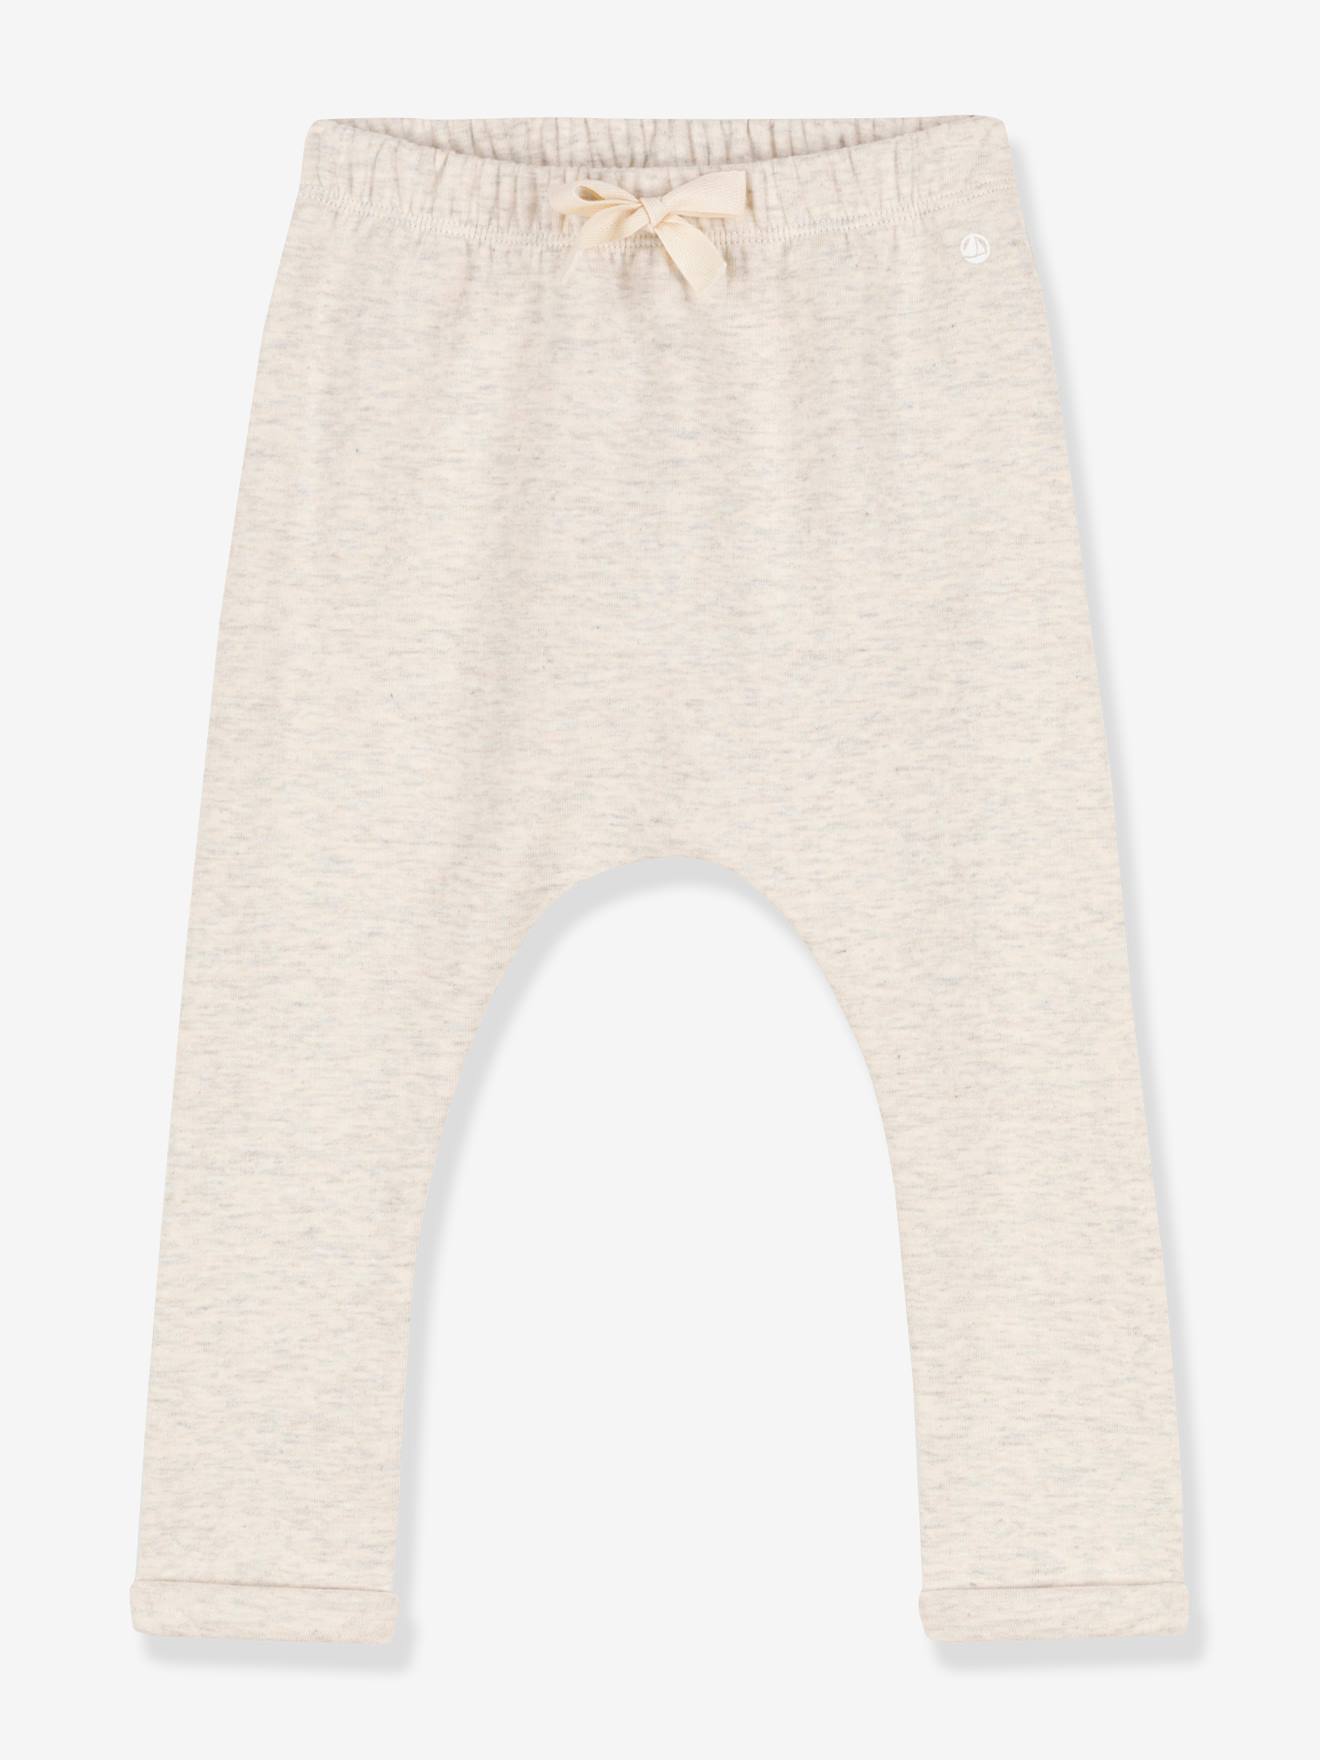 Trousers in Thick Jersey Knit for Babies, by Petit Bateau marl beige